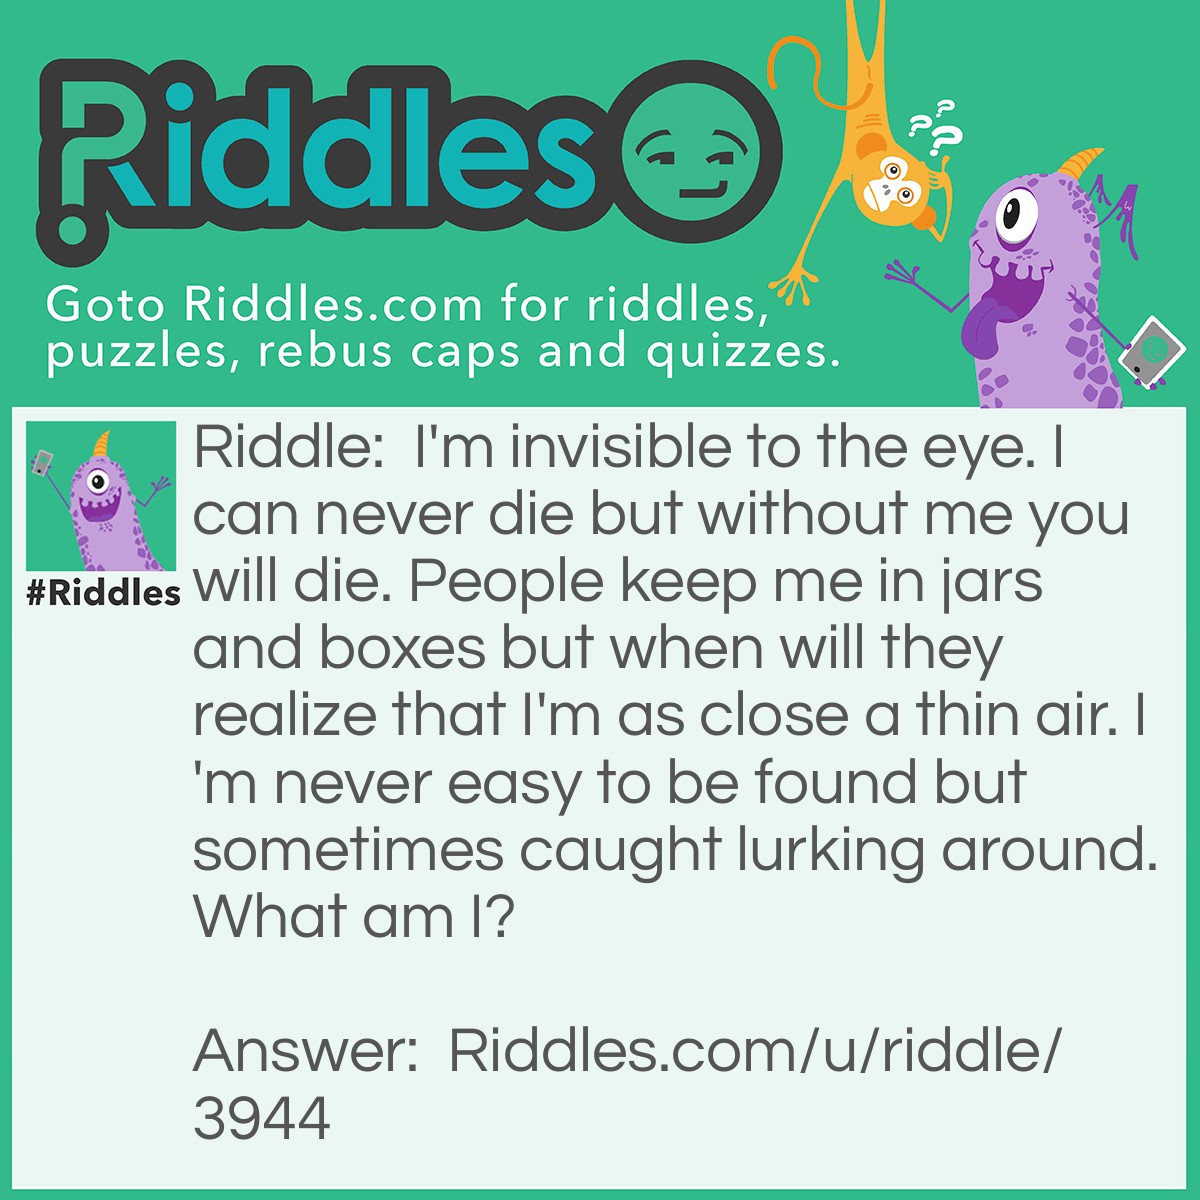 Riddle: I'm invisible to the eye. I can never die but without me, you will die. People keep me in jars and boxes but when will they realize that I'm as close as thin air. I'm never <a href="/easy-riddles">easy</a> to be found but sometimes caught lurking around. What am I? Answer: Your soul.